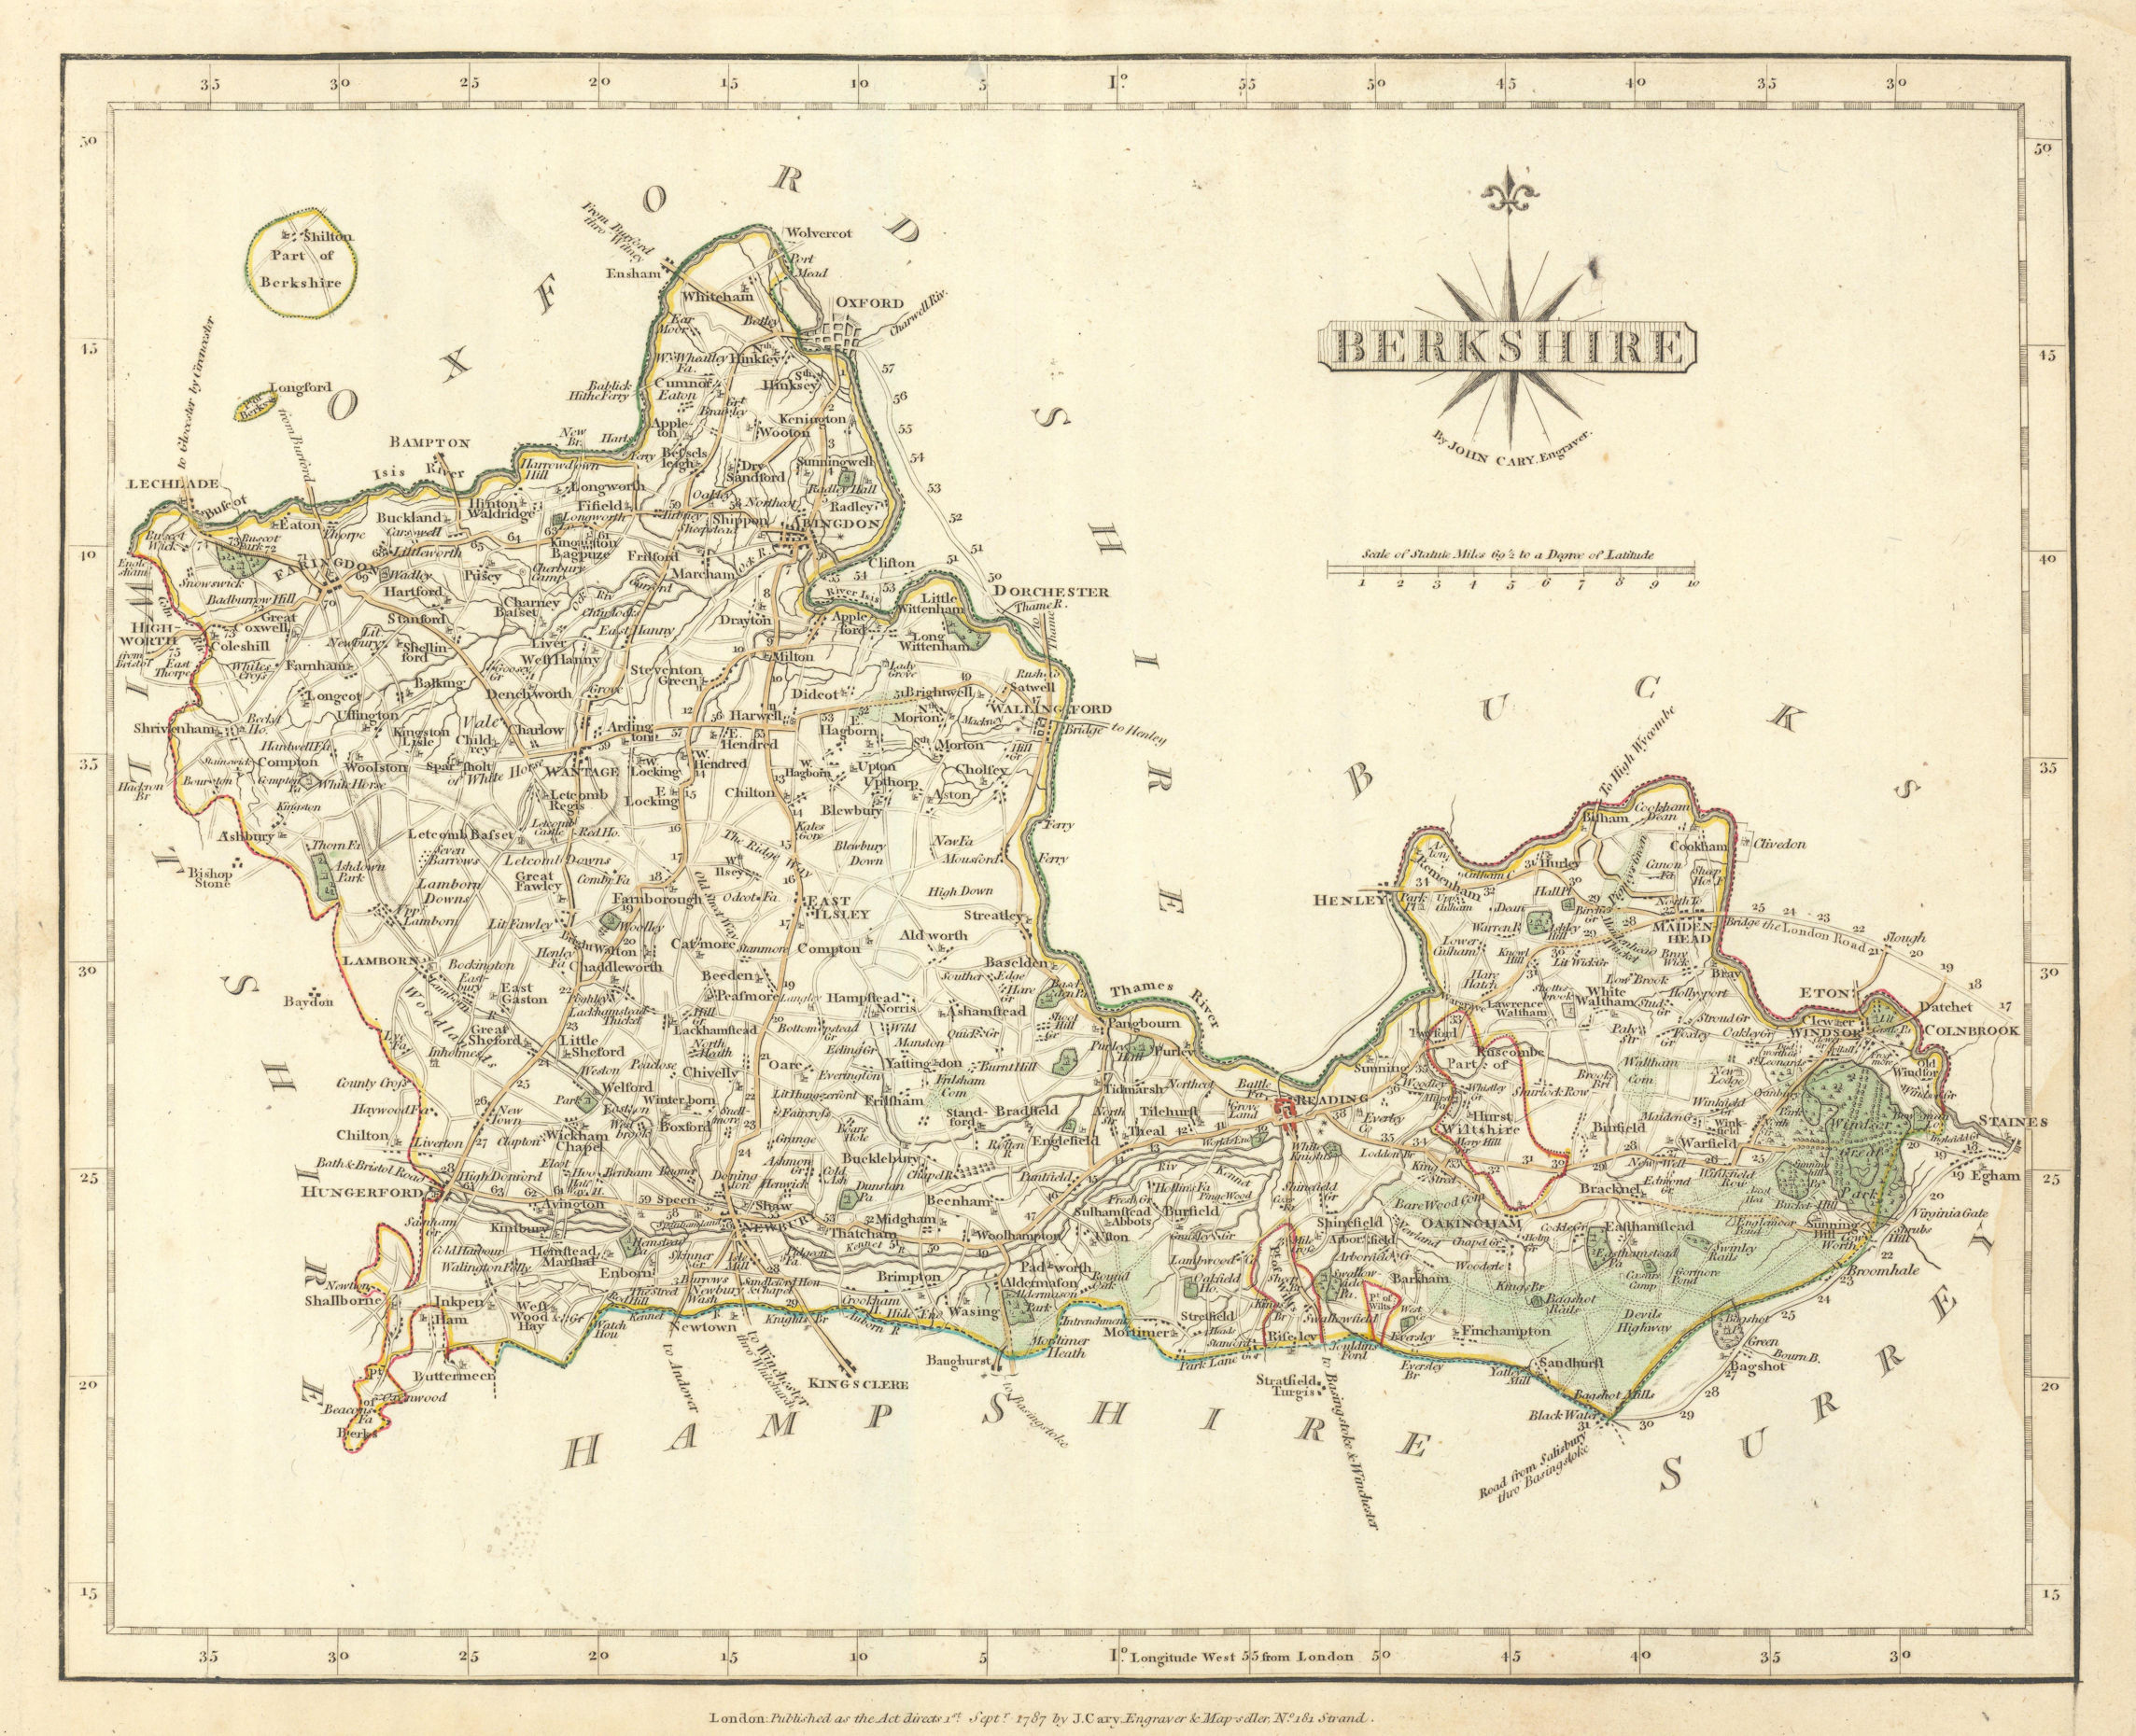 Associate Product Antique county map of BERKSHIRE by JOHN CARY. Original outline colour 1793